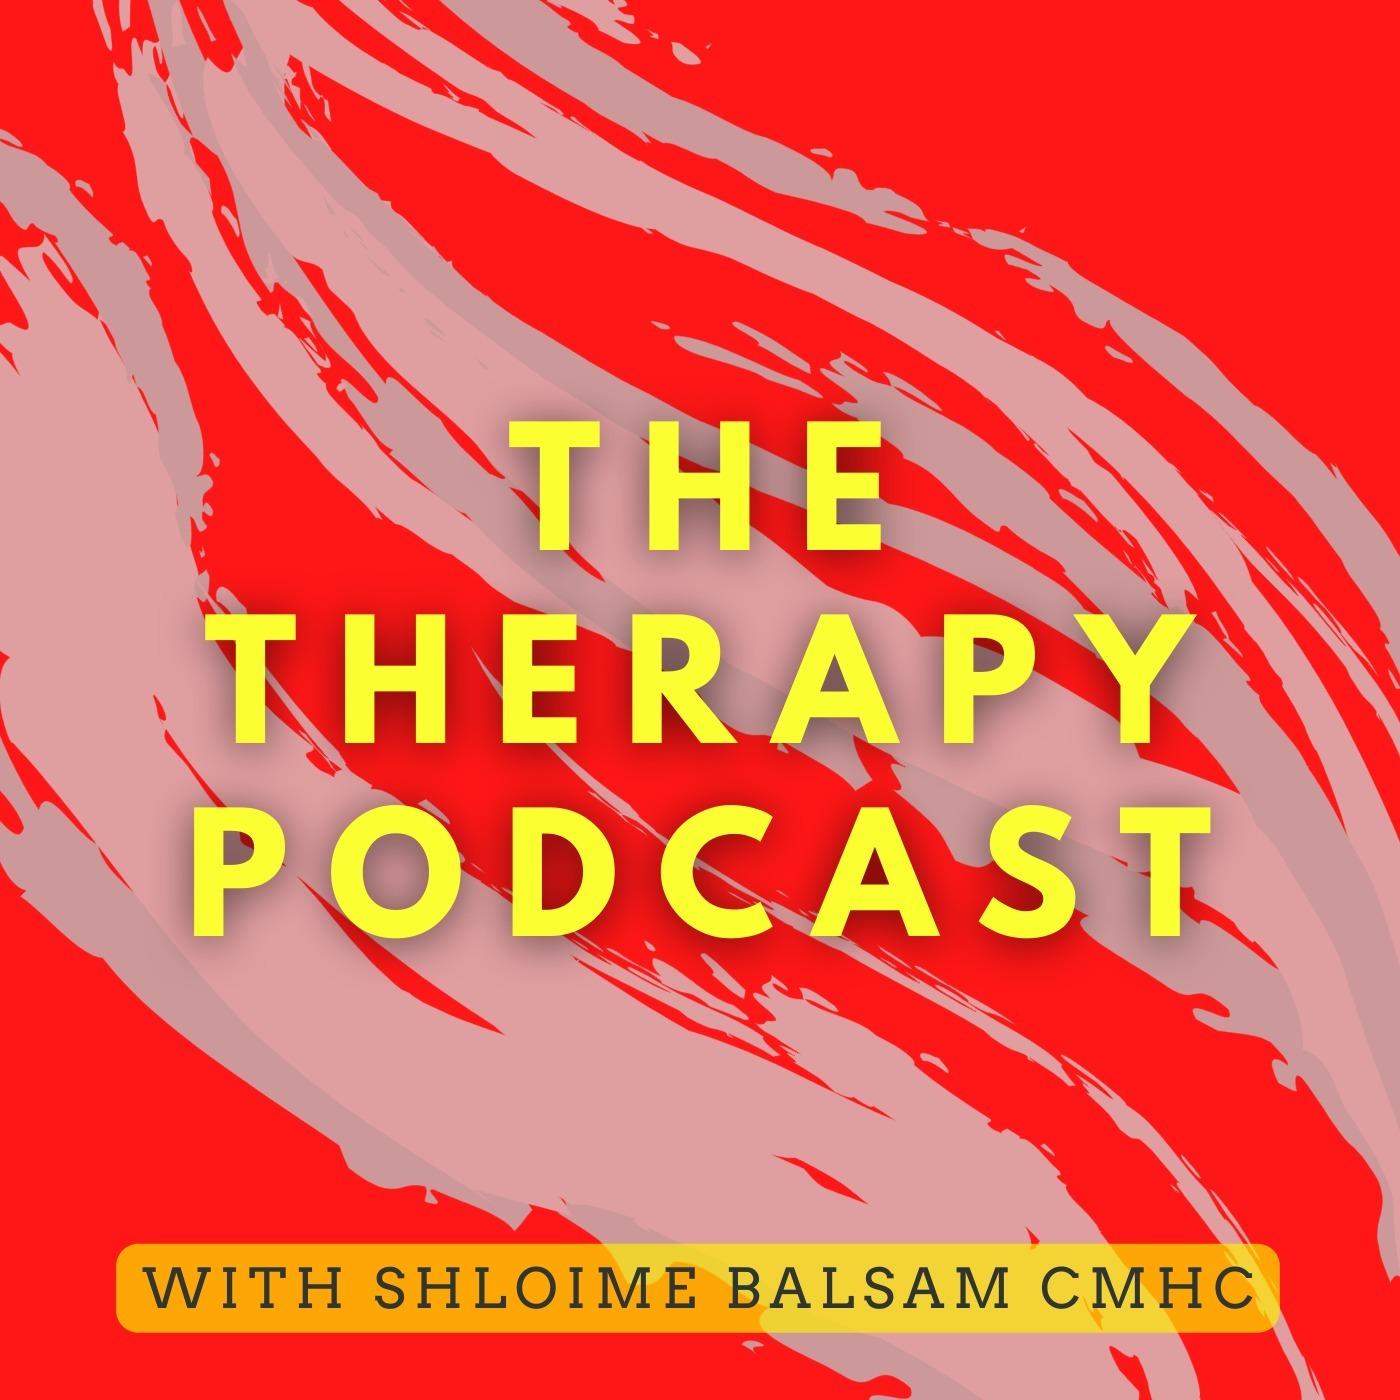 The Therapy Podcast